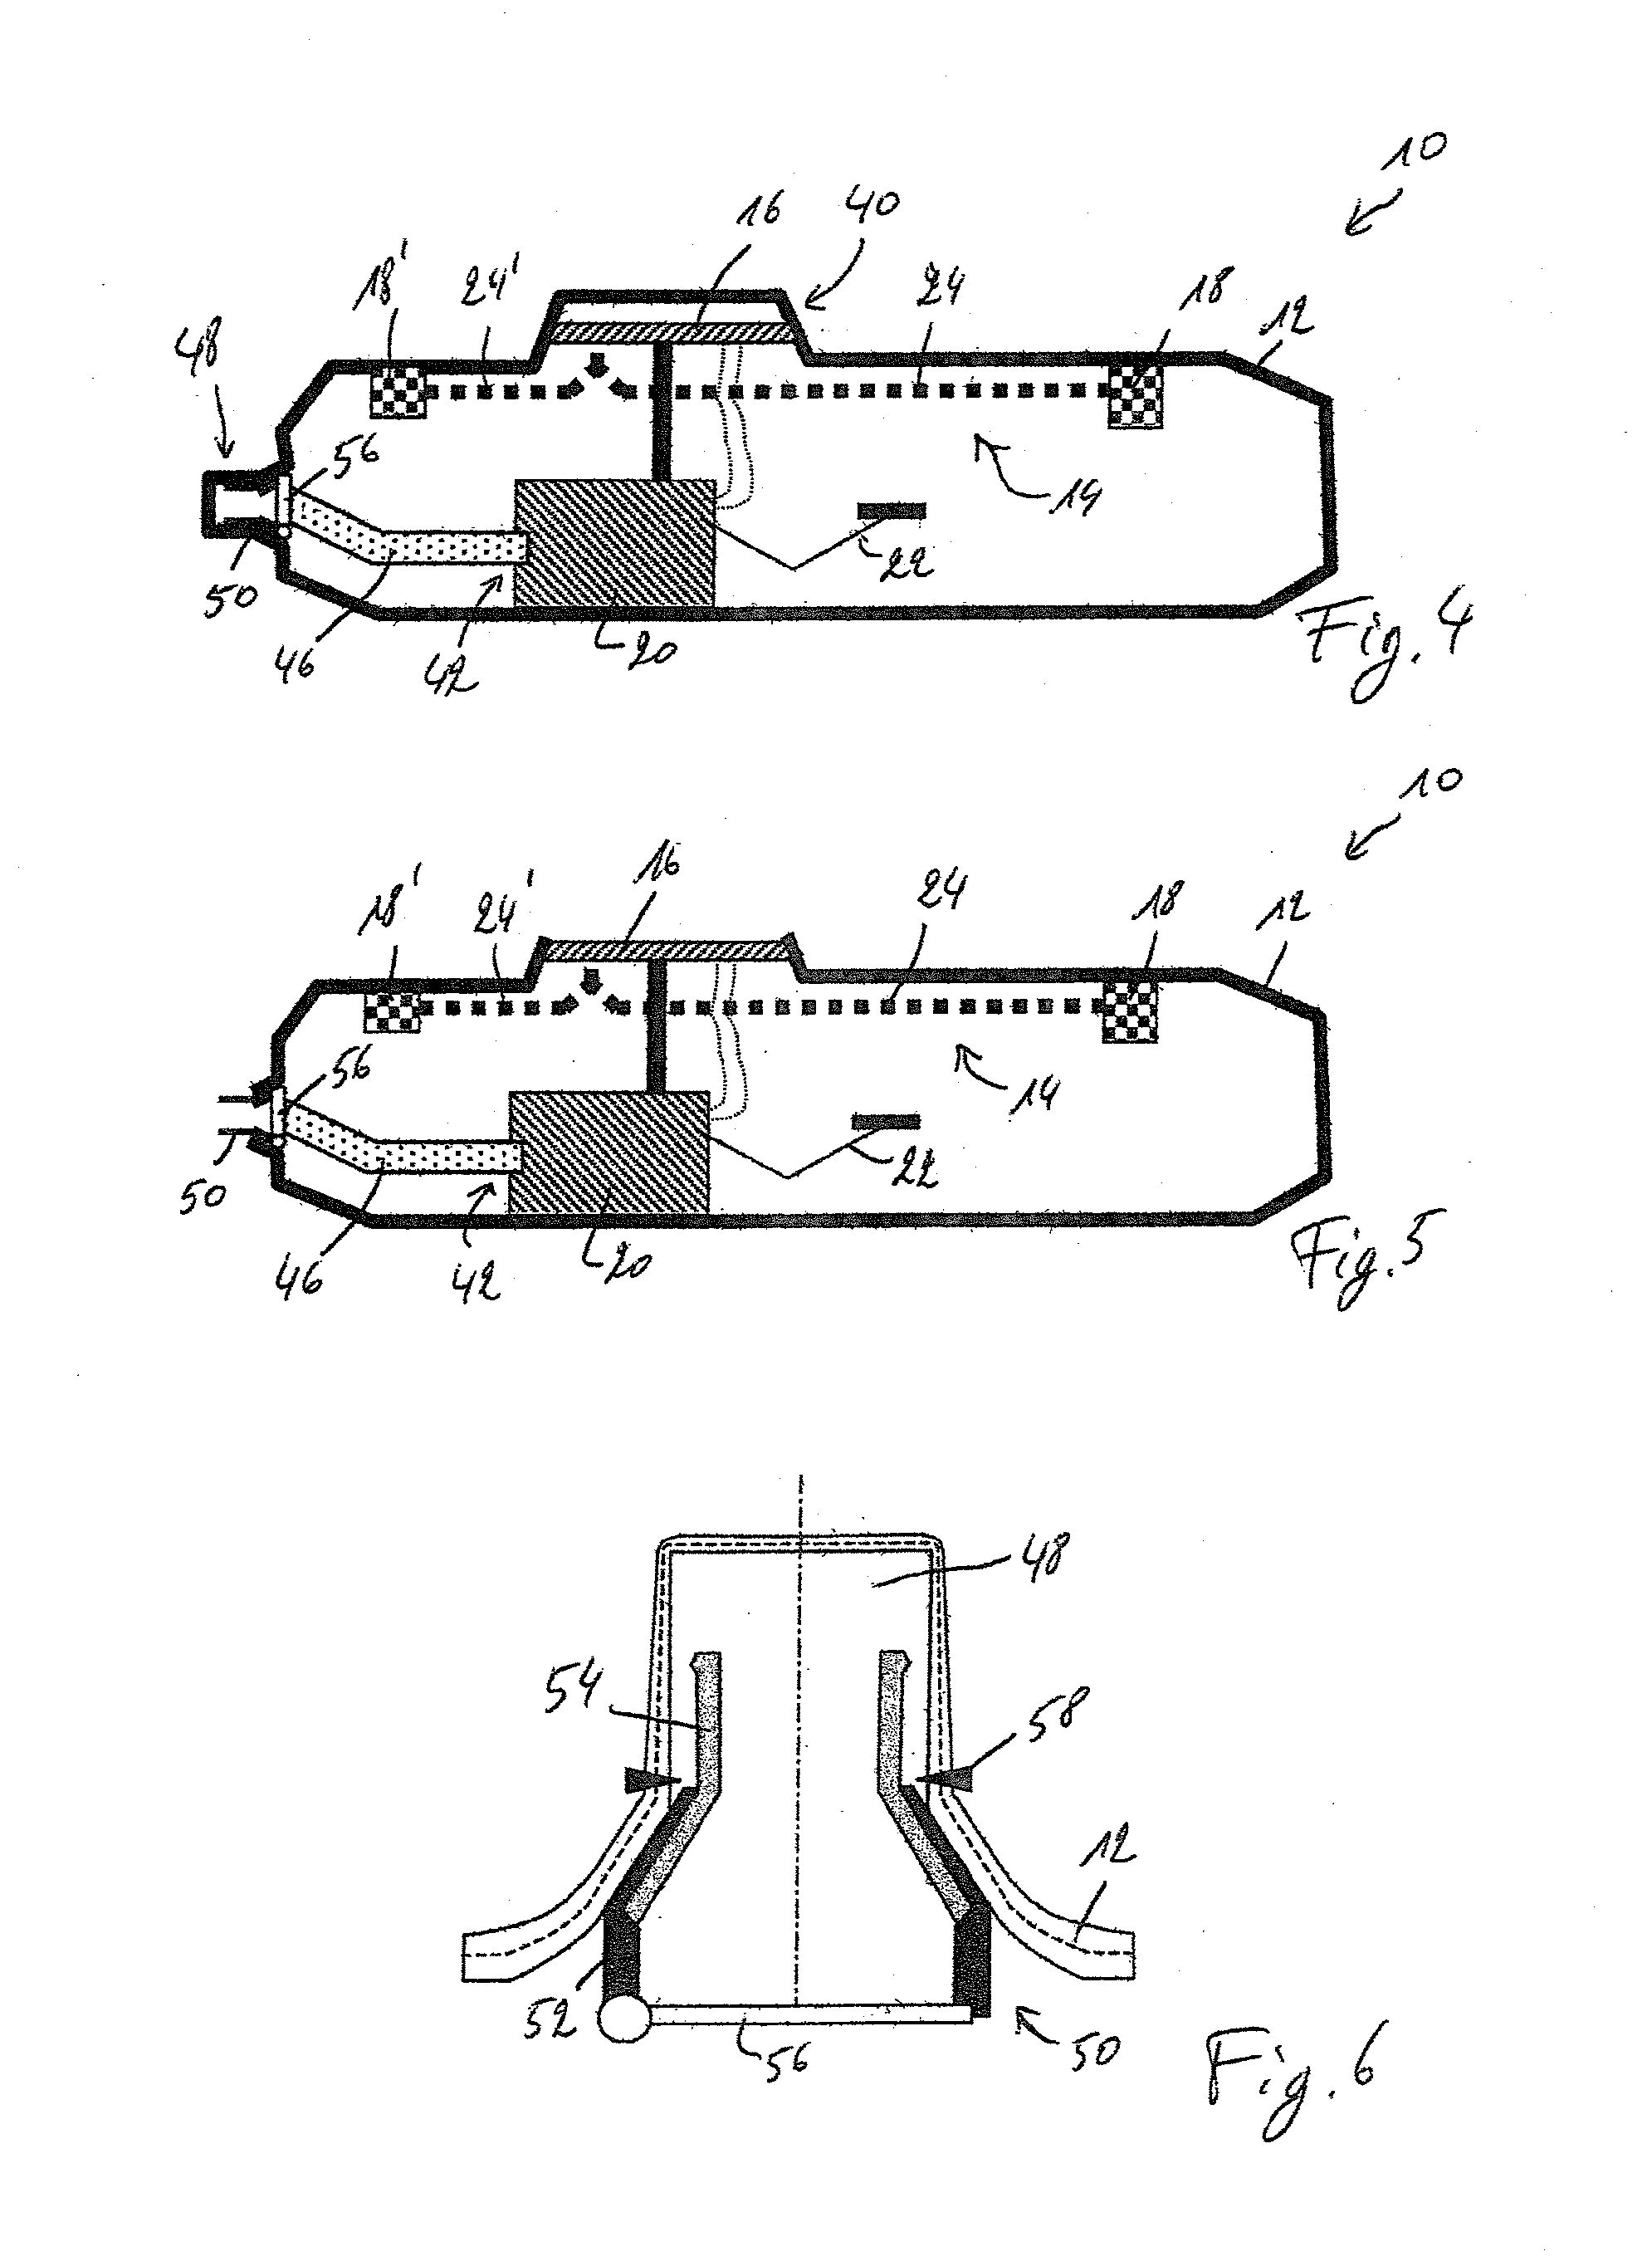 Process for manufacturing a fuel tank